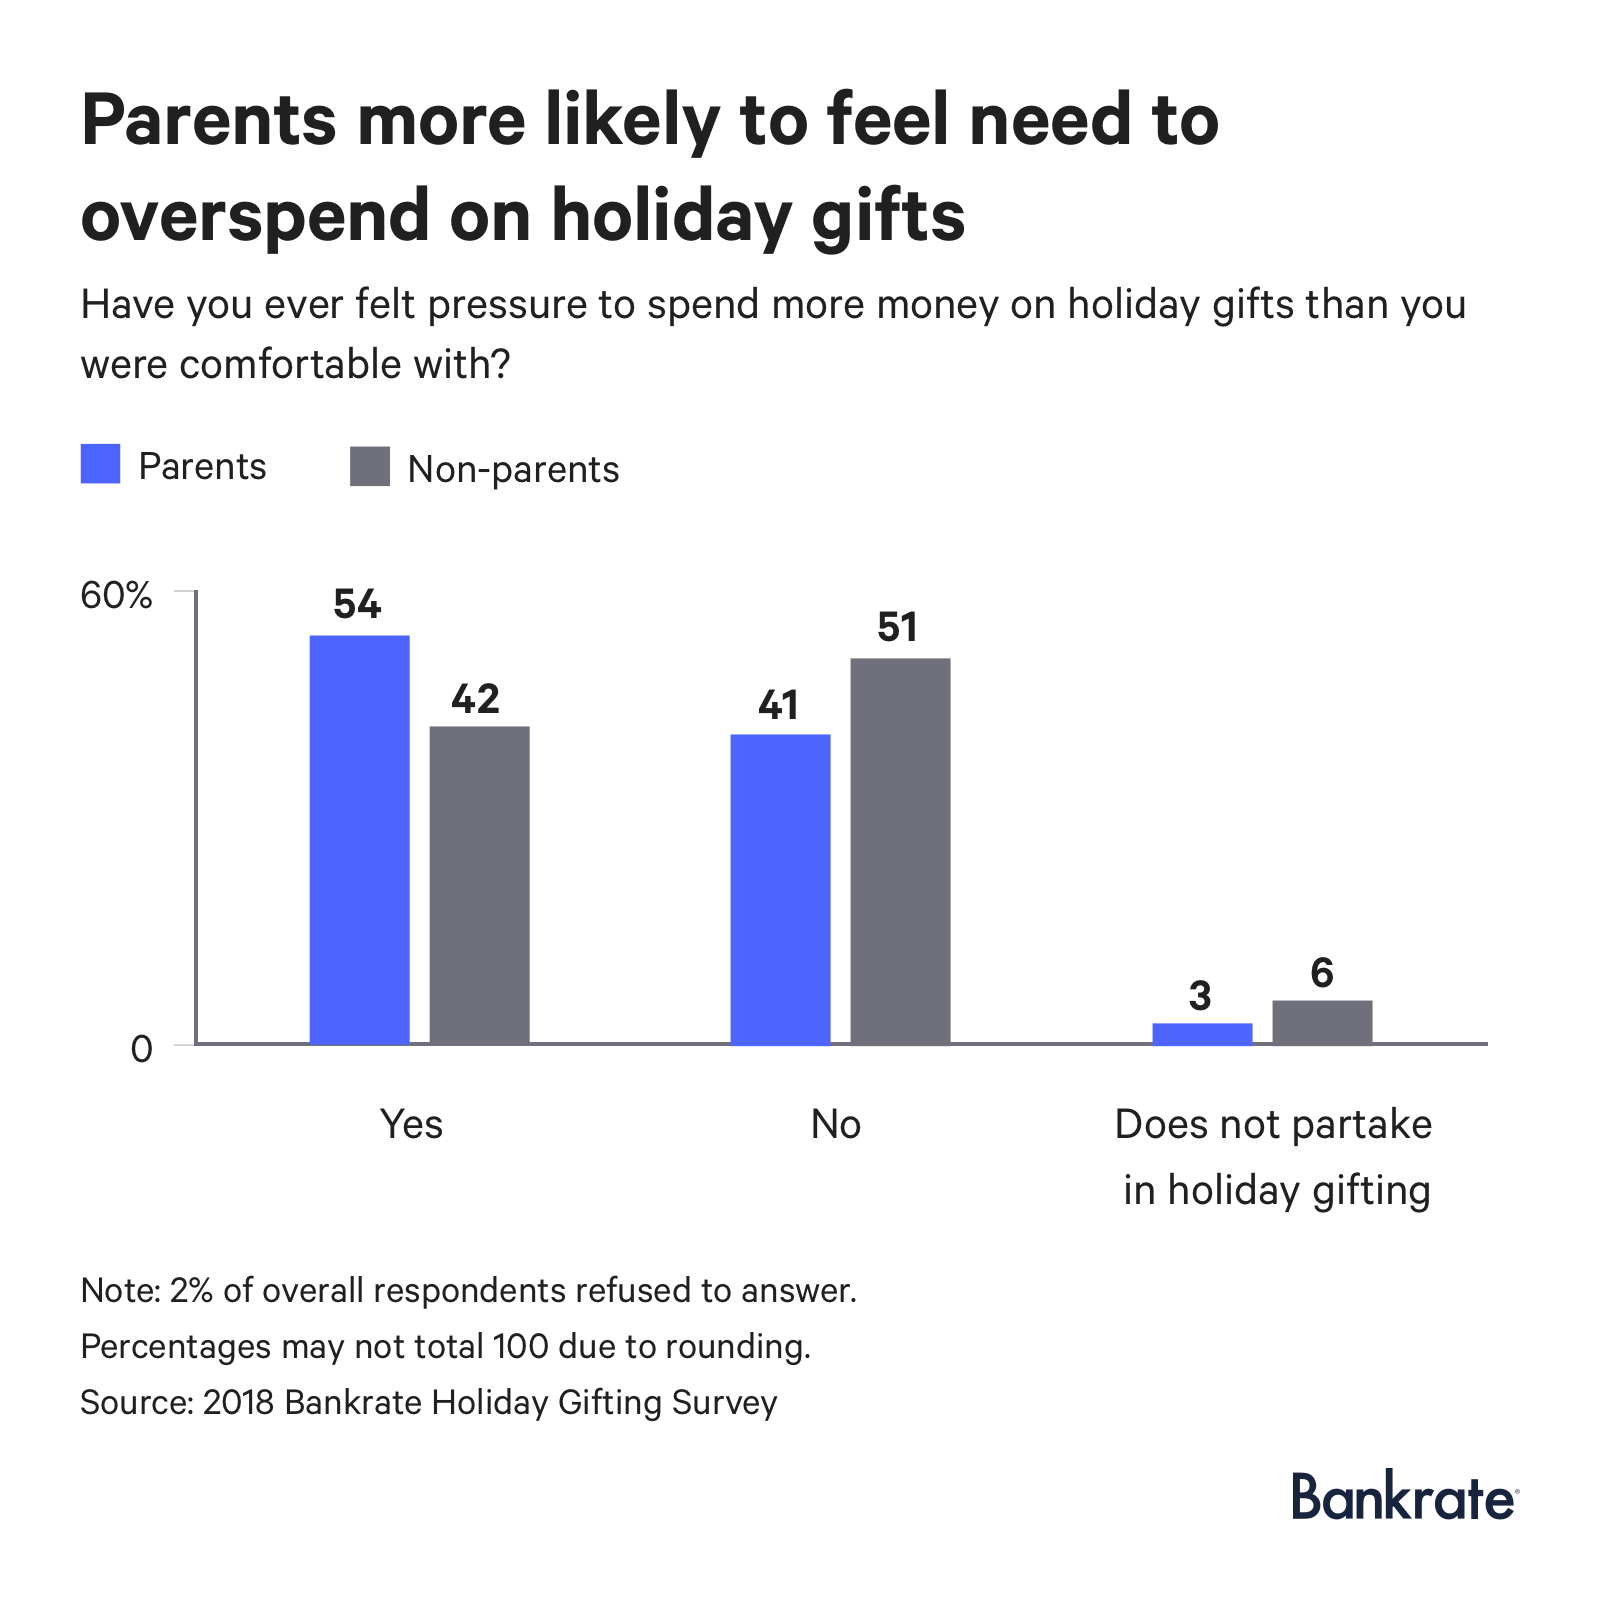 54% of parents (vs. 41% of non-parents) feel pressured to spend more money on holiday gifts